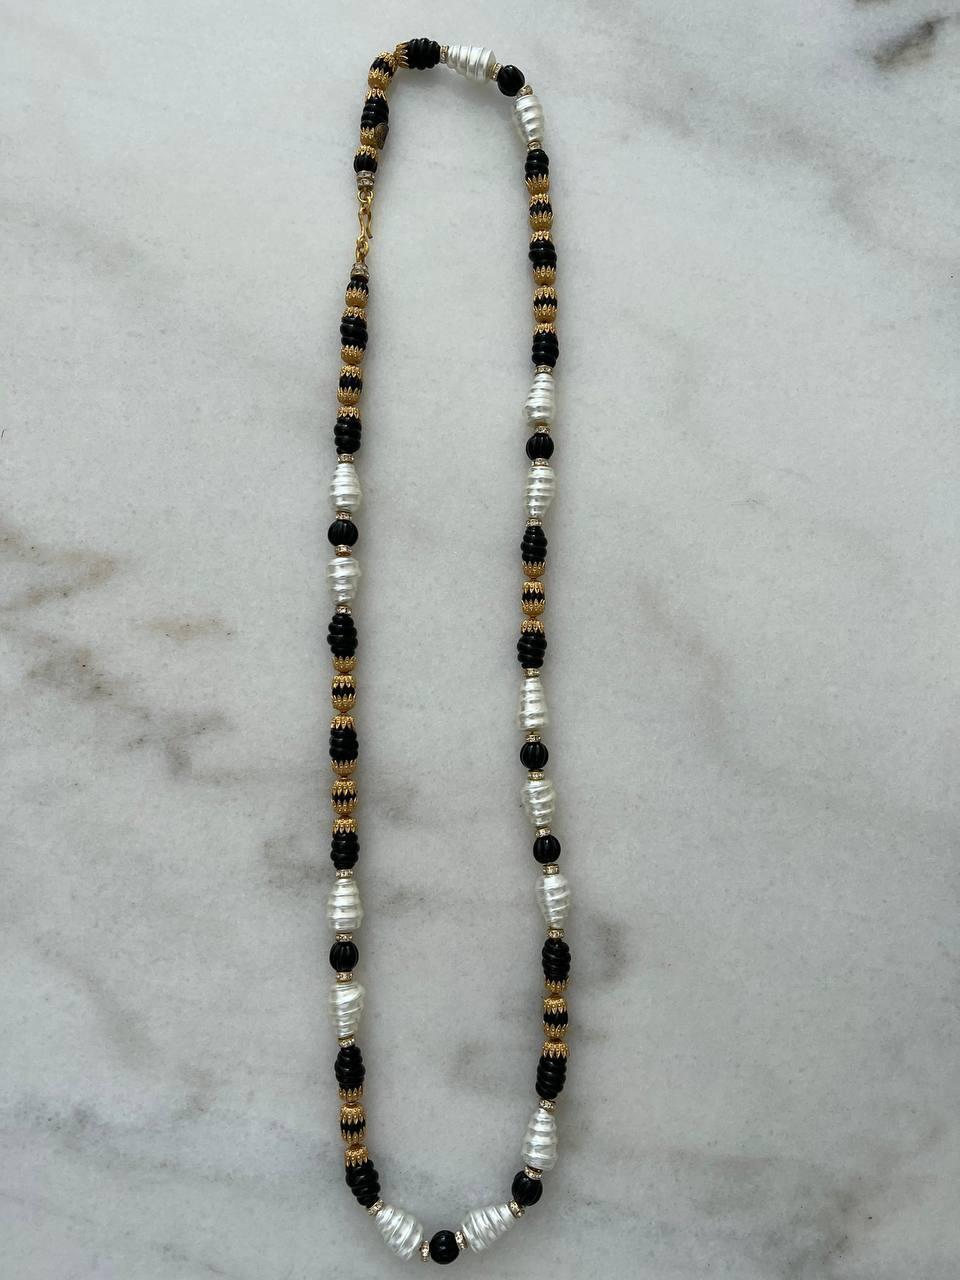 Baroque Revival Vintage Chanel Glass Pearl and Strass Black&White Necklace, 1985